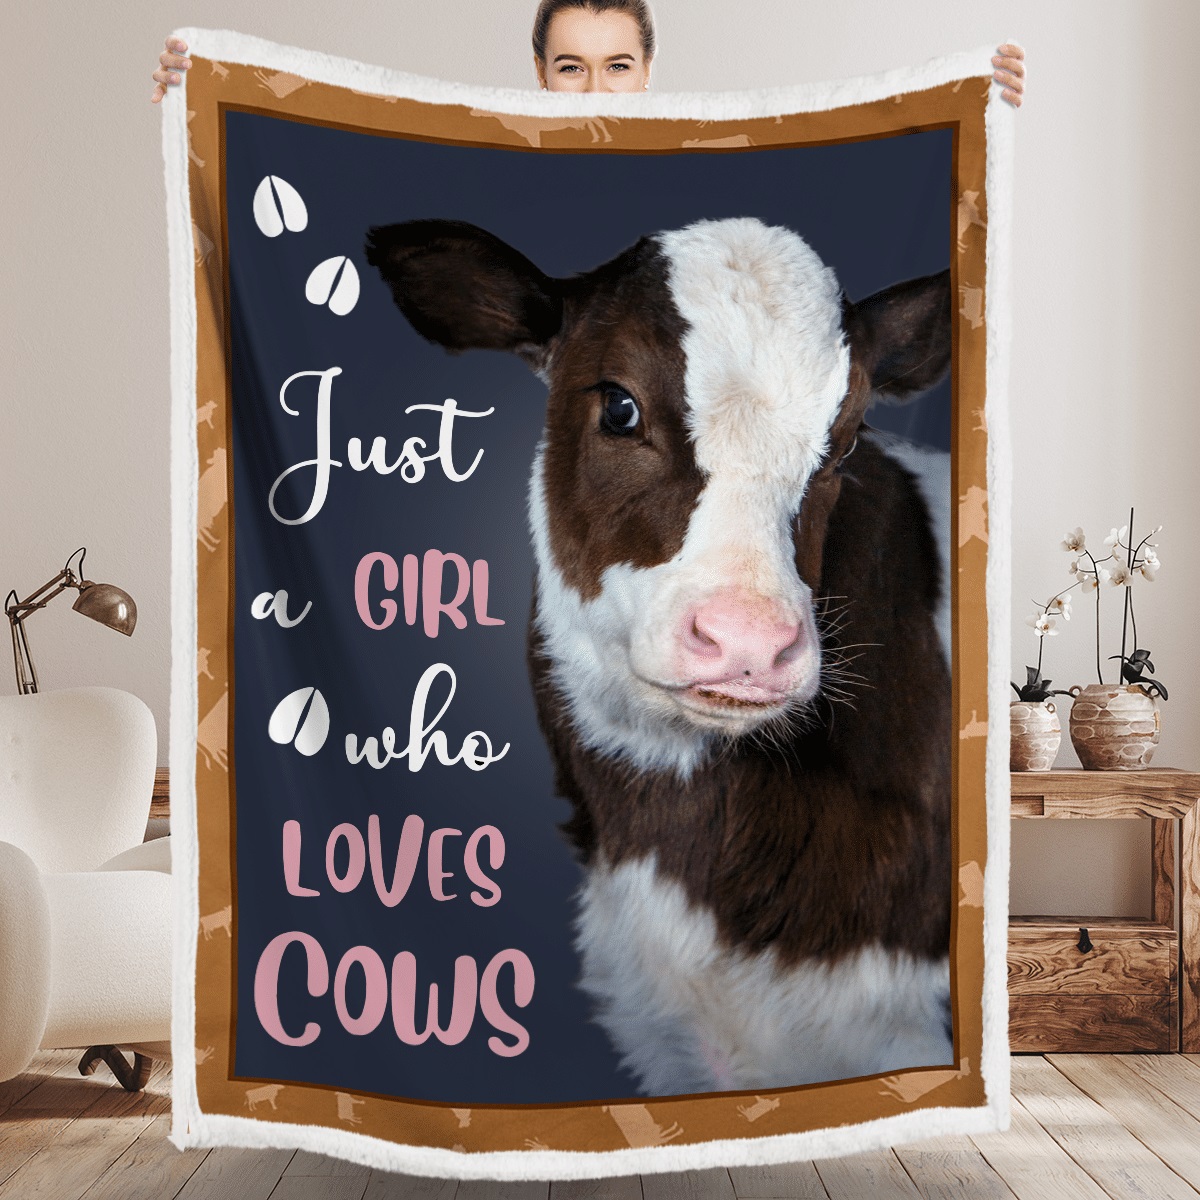 Just a girl who loves cows blanket – Saleoff 070921